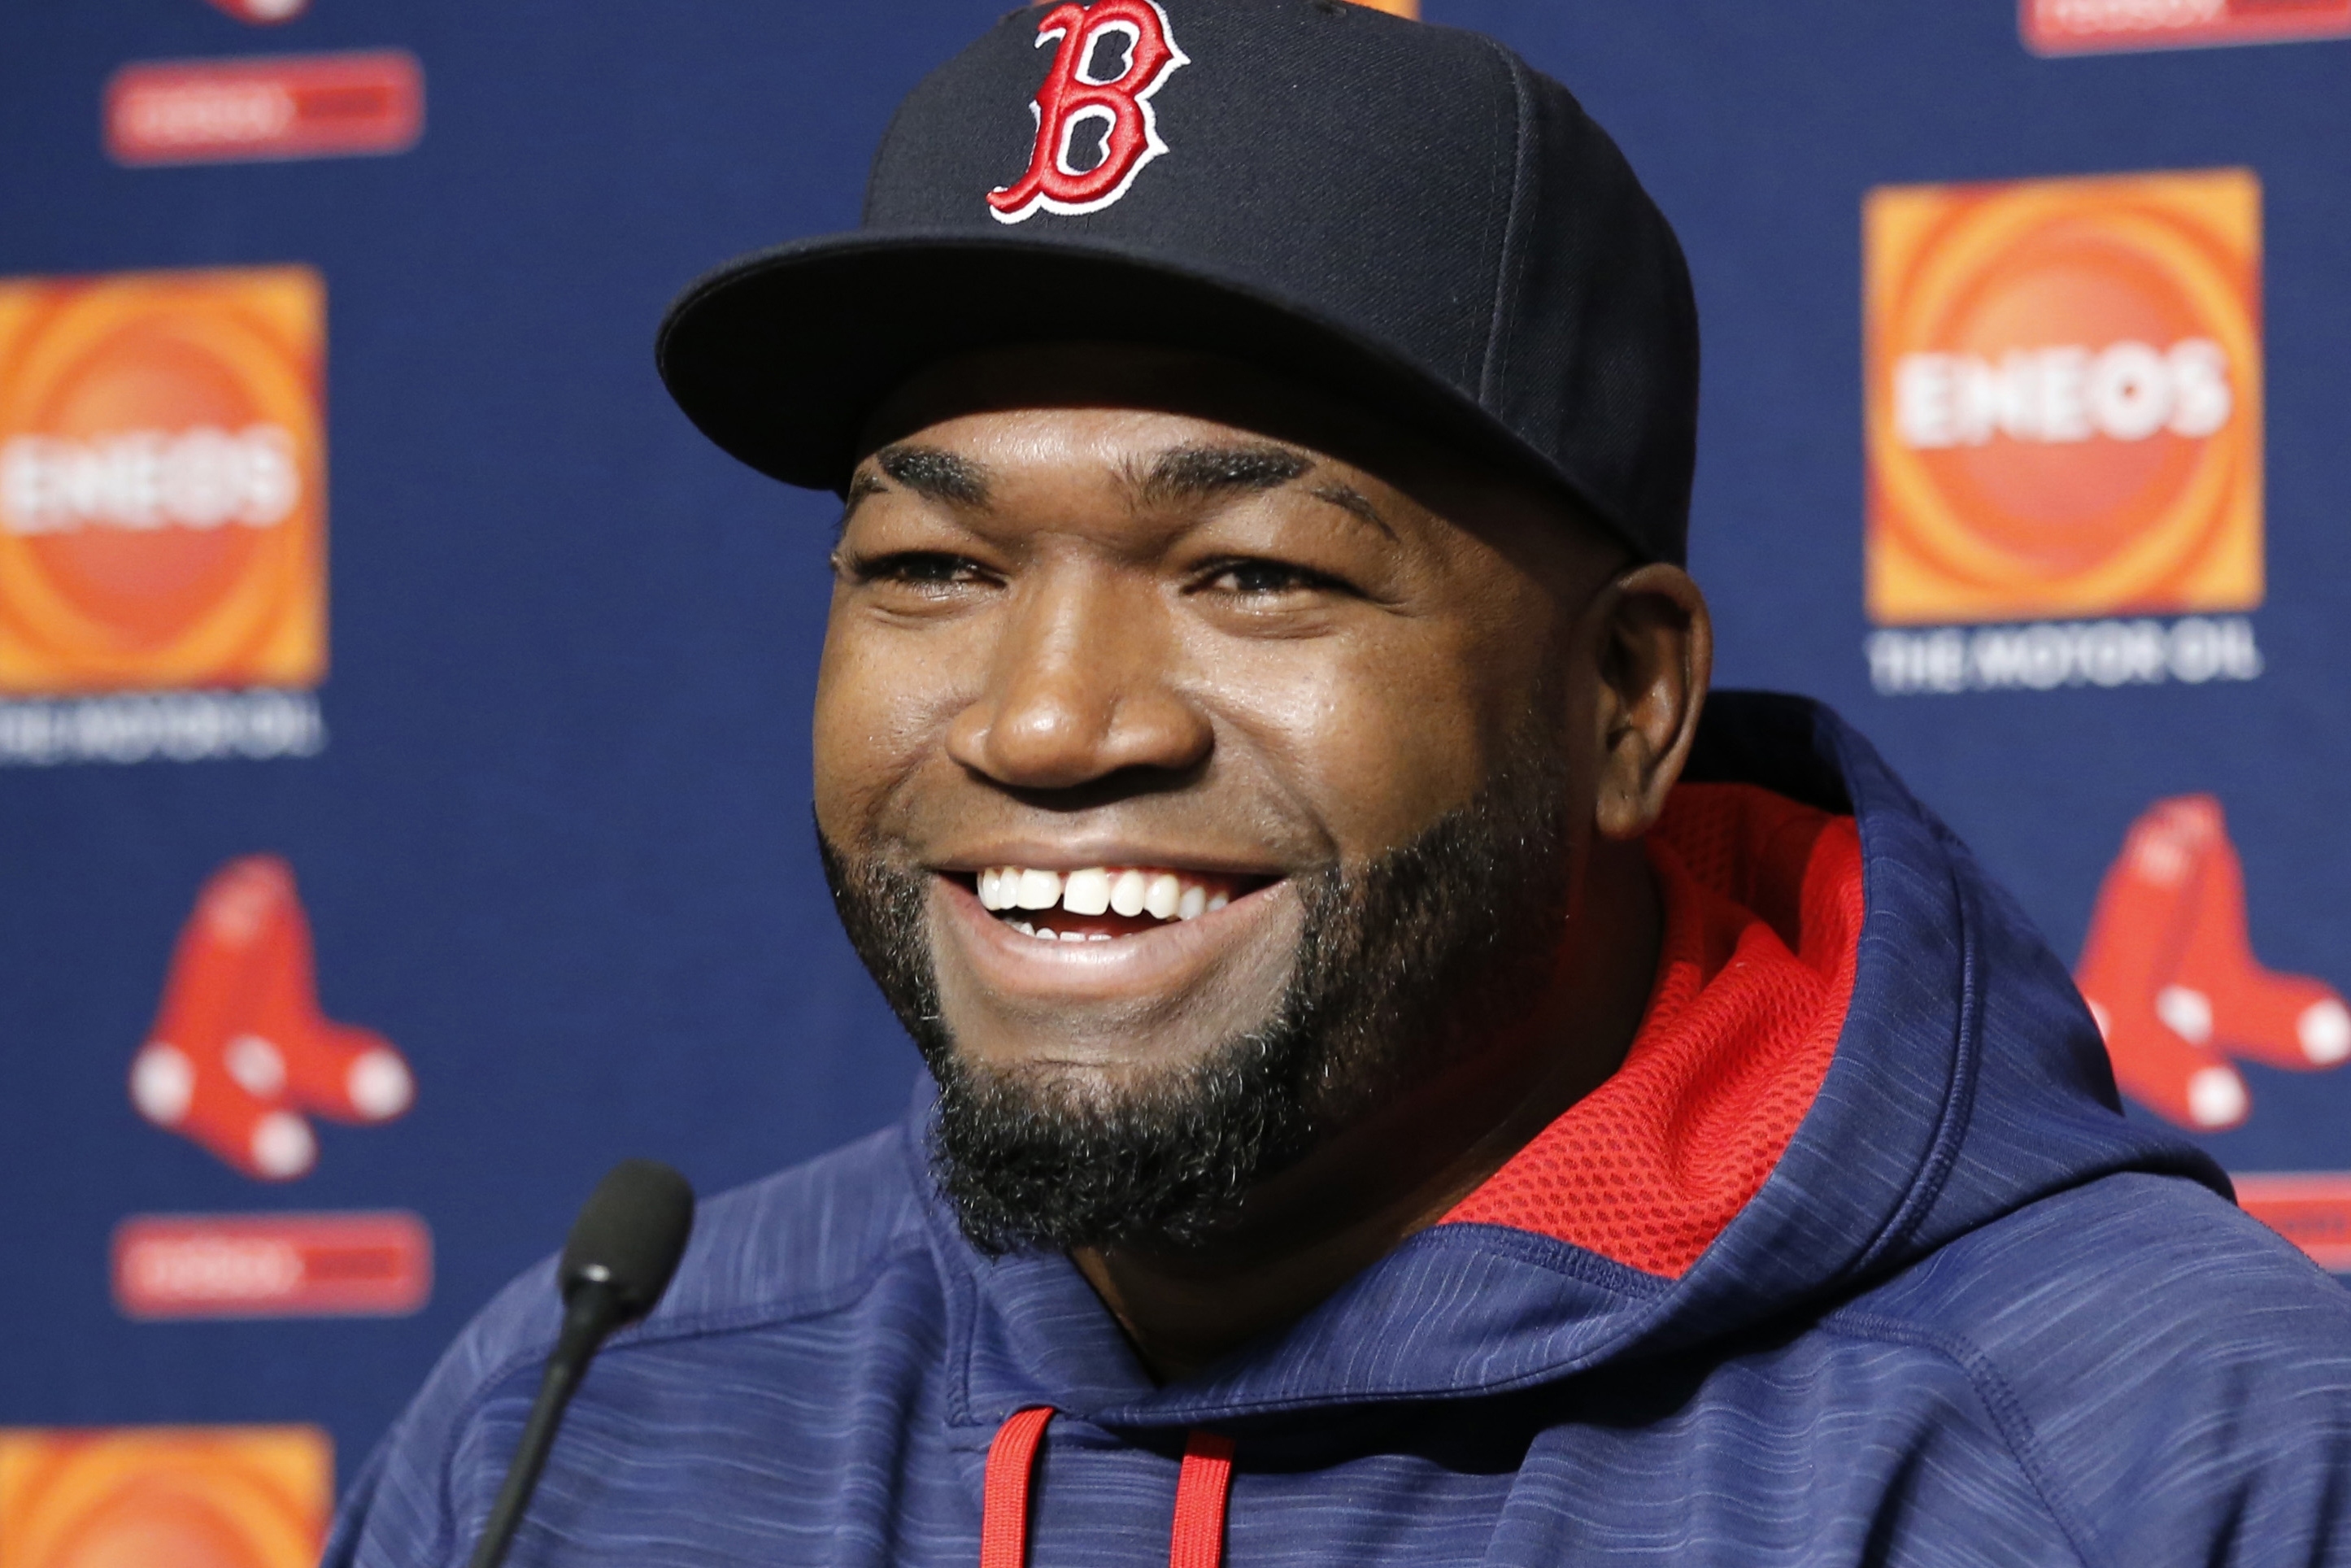 Red Sox notes: Big Papi recalls intense rivalry with Yankees